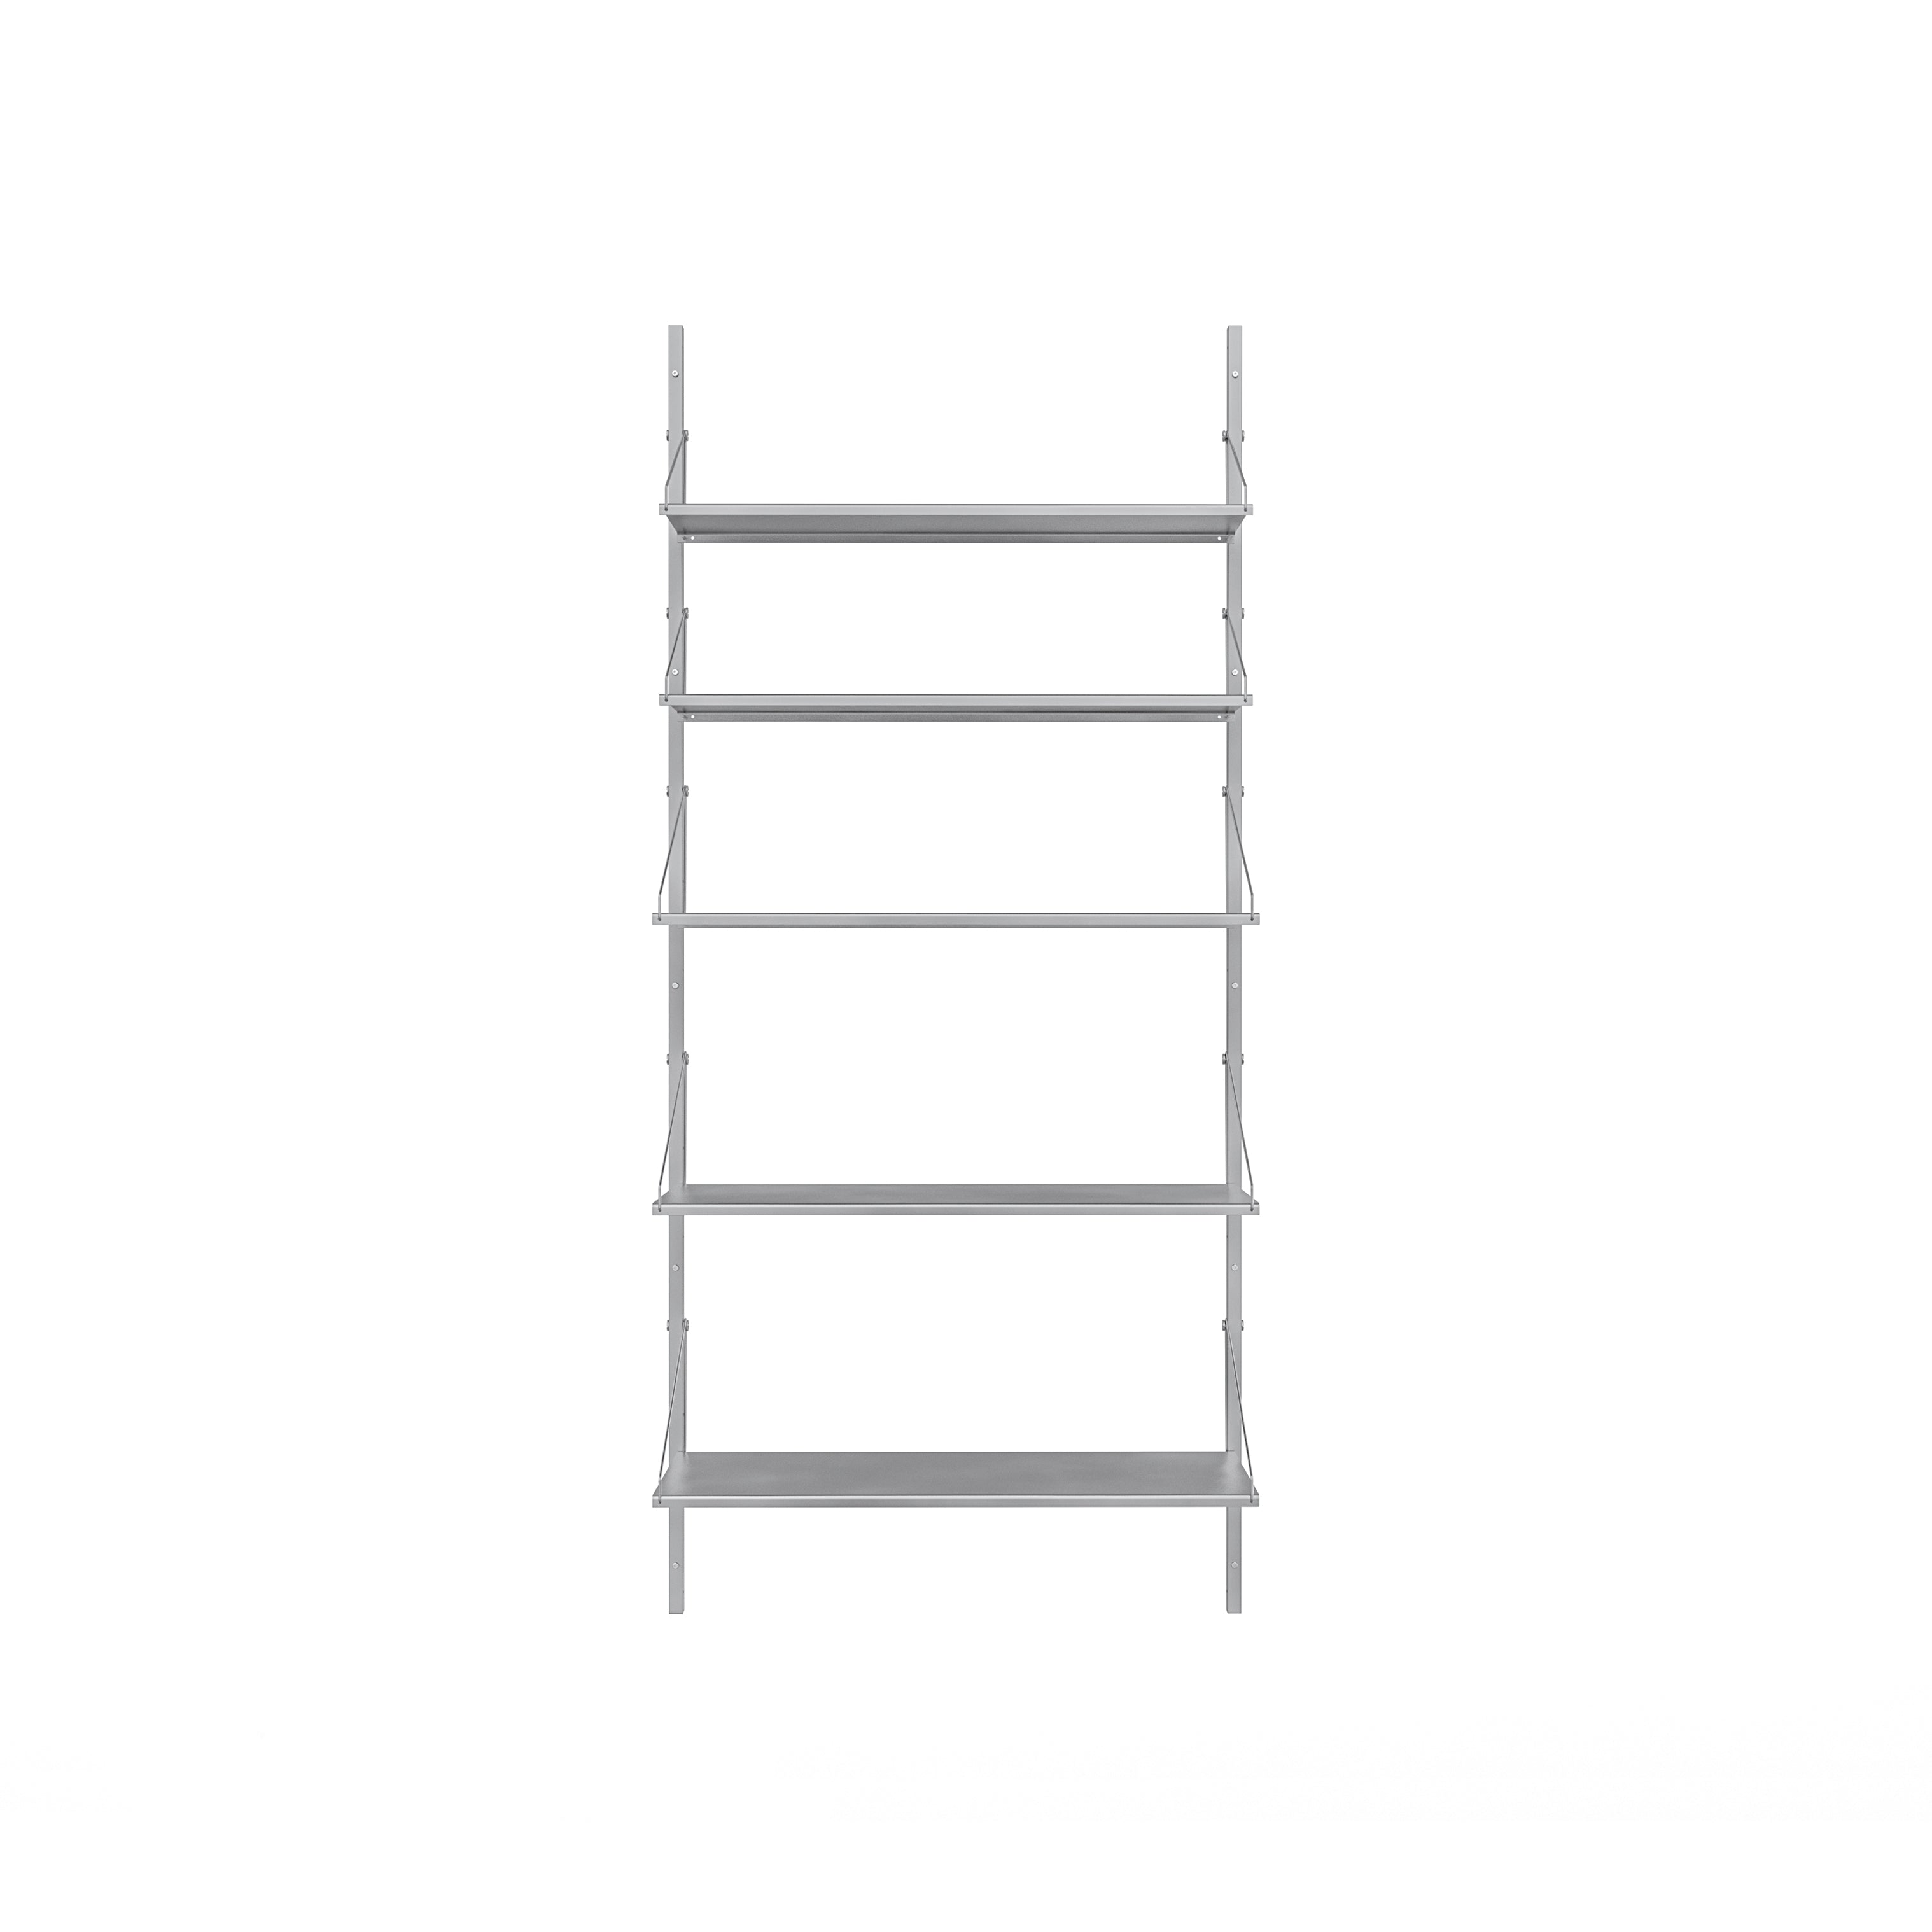 Shelf Library: Steel + High (W80) + Single Section + Stainless Steel